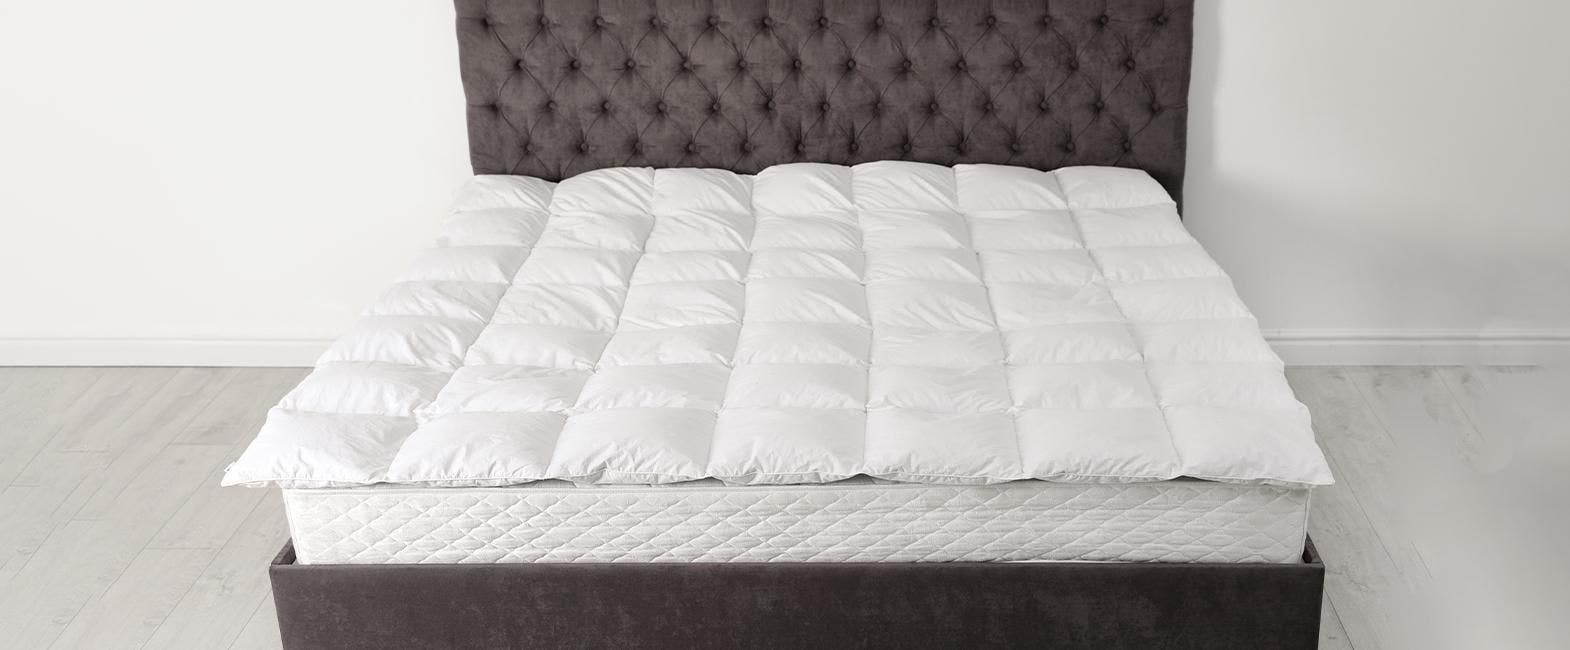 Mattress Topper: Unraveling the Secret to a Softer Slumber